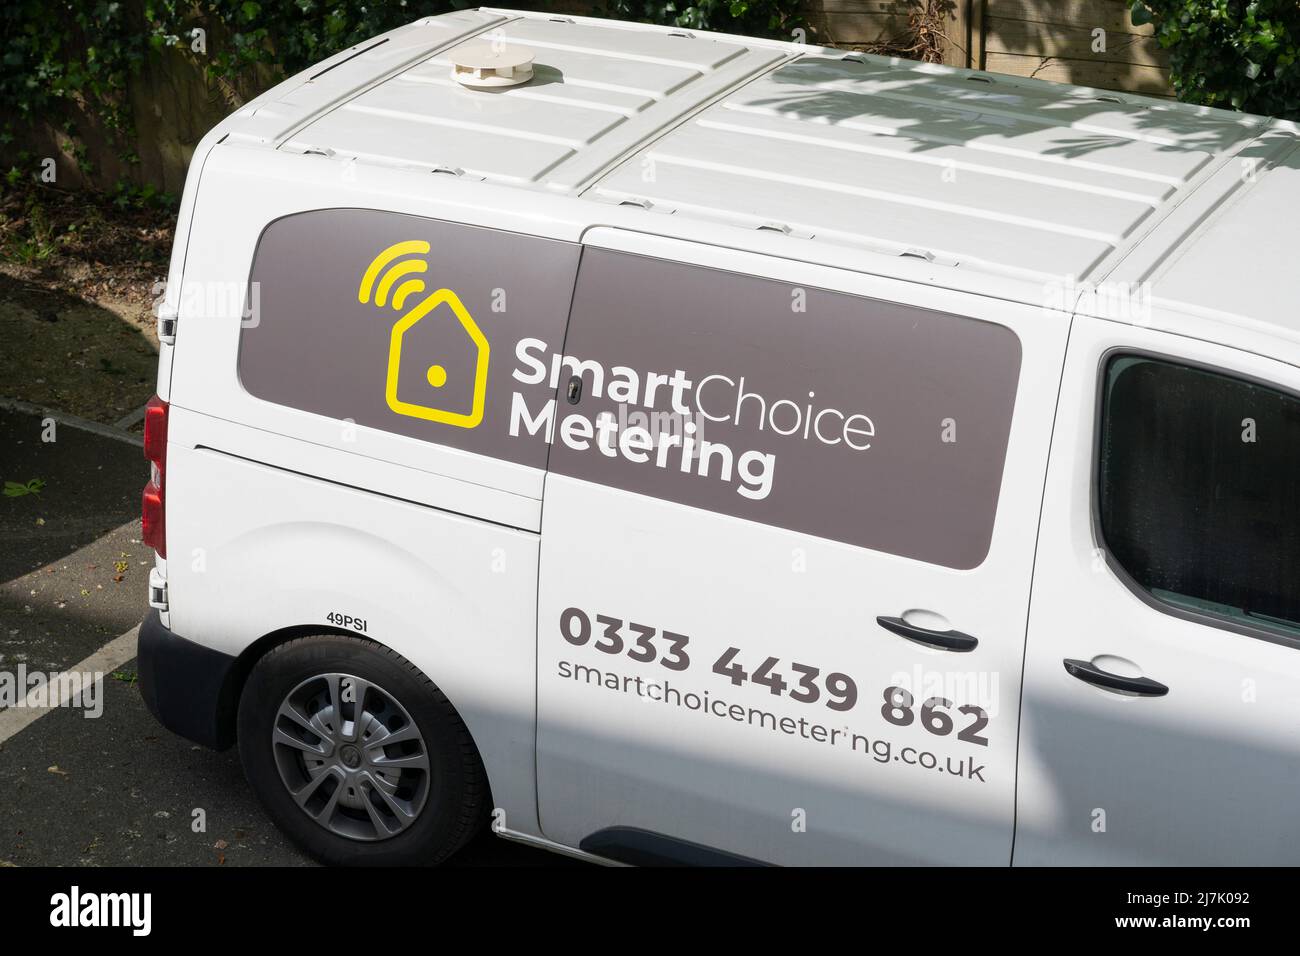 Smart Choice Metering van parked for installing smart meters as part of the UK government's Smart Meter Implementation Programme (SMIP). UK Stock Photo